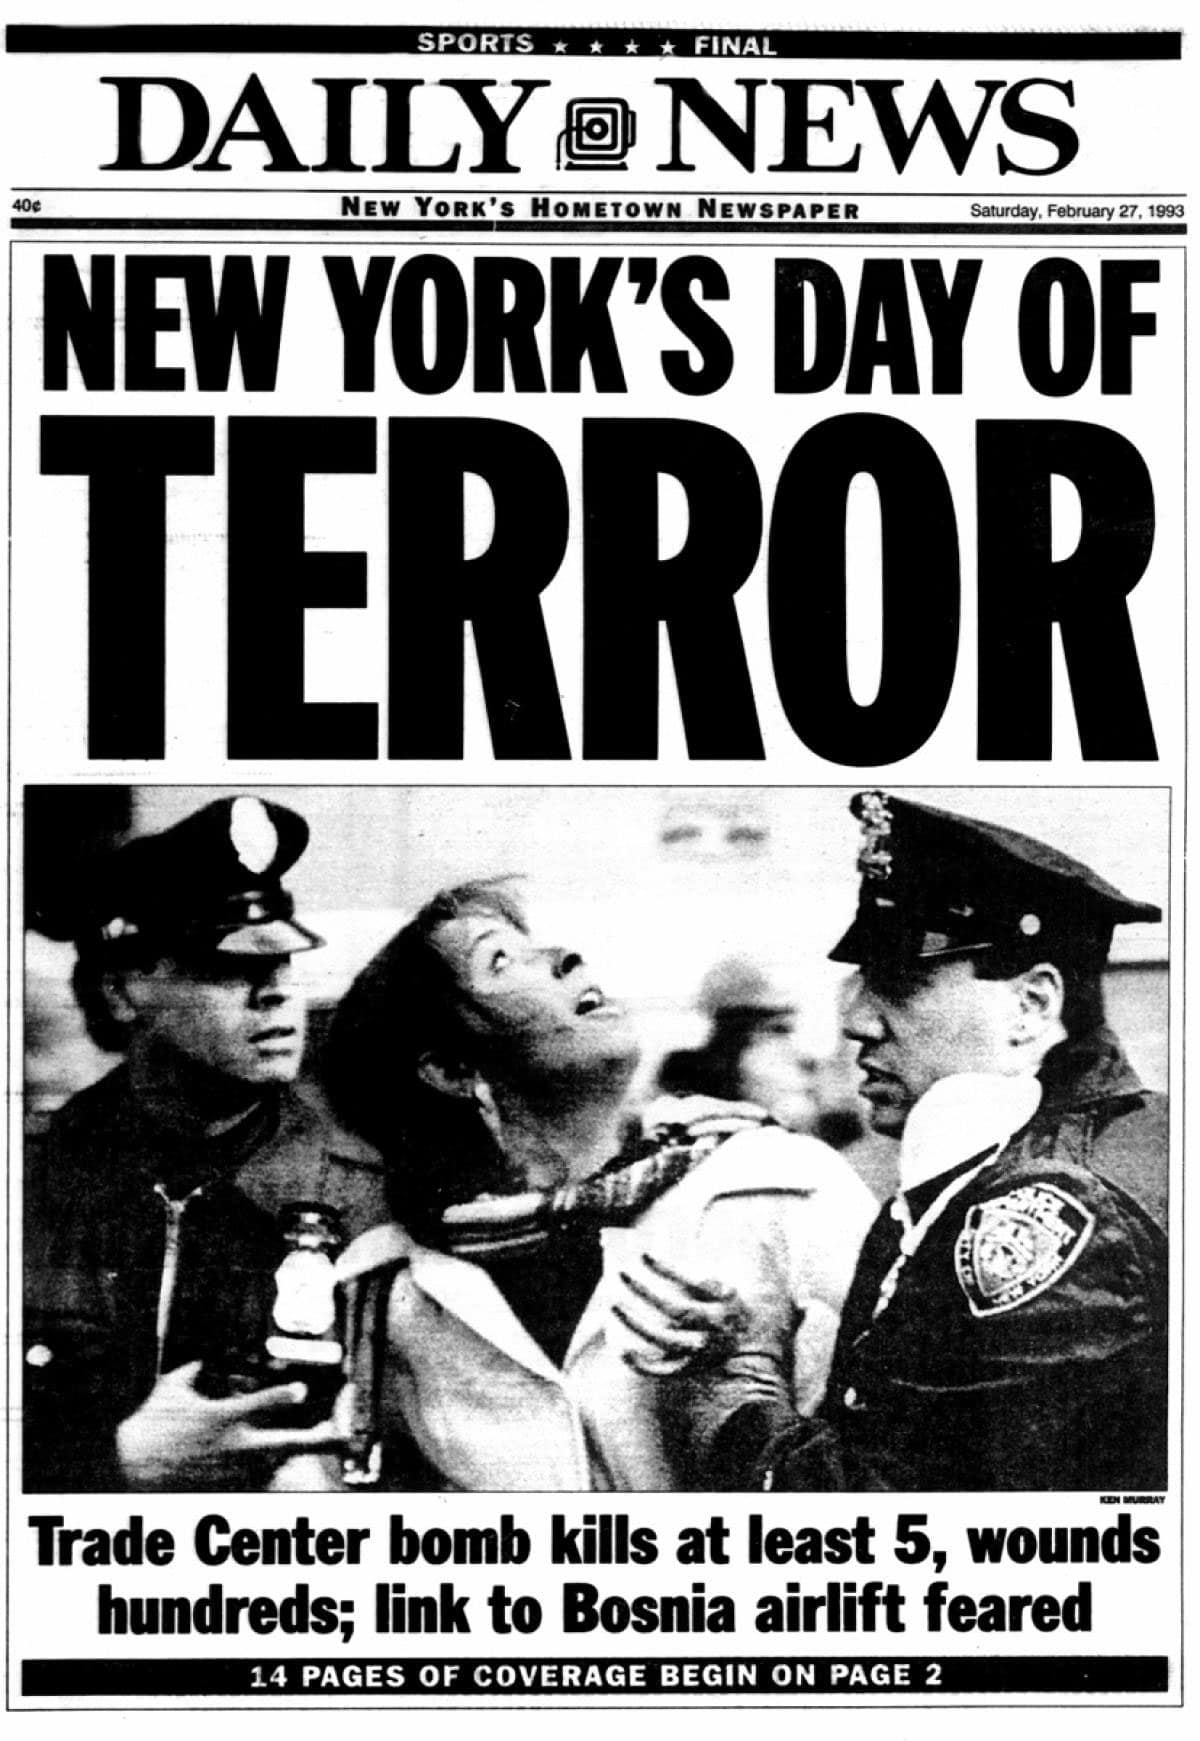 New York Daily News front page, Feb 26th, 1993.